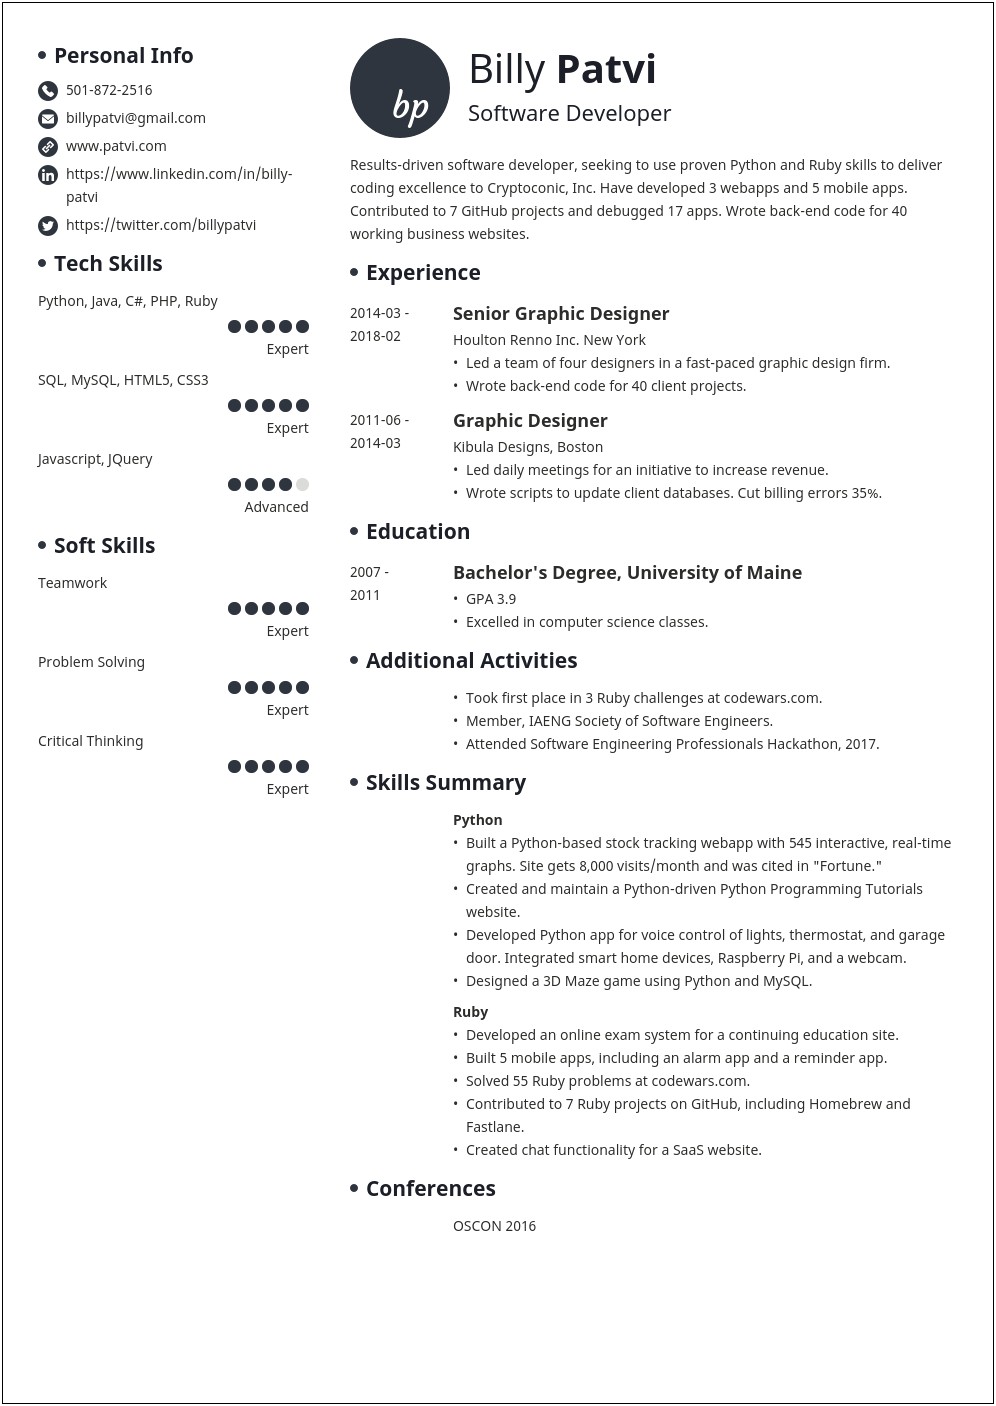 Professional Resume Examples For Changing Careers